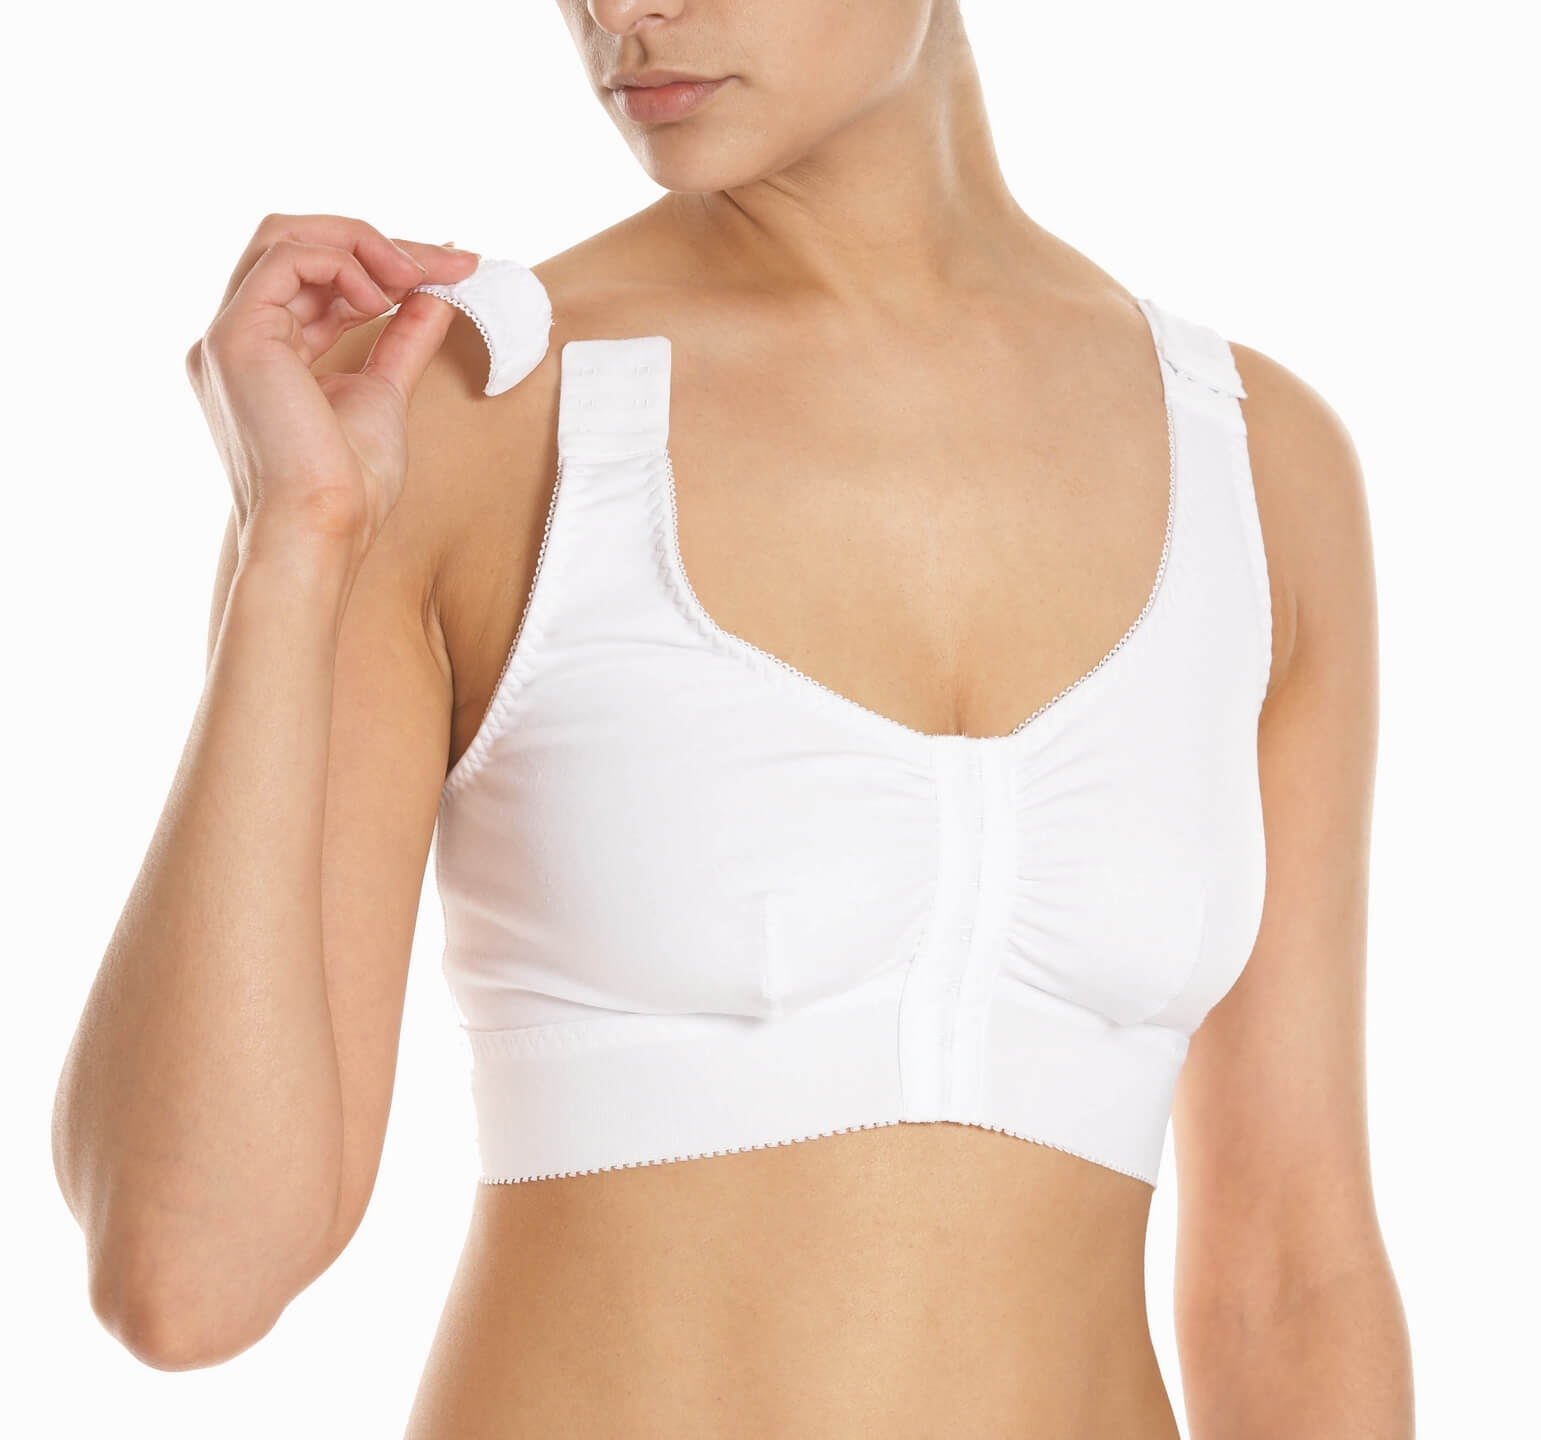 Surgical Bra with Underbust Support and Adjustable Straps, Br2